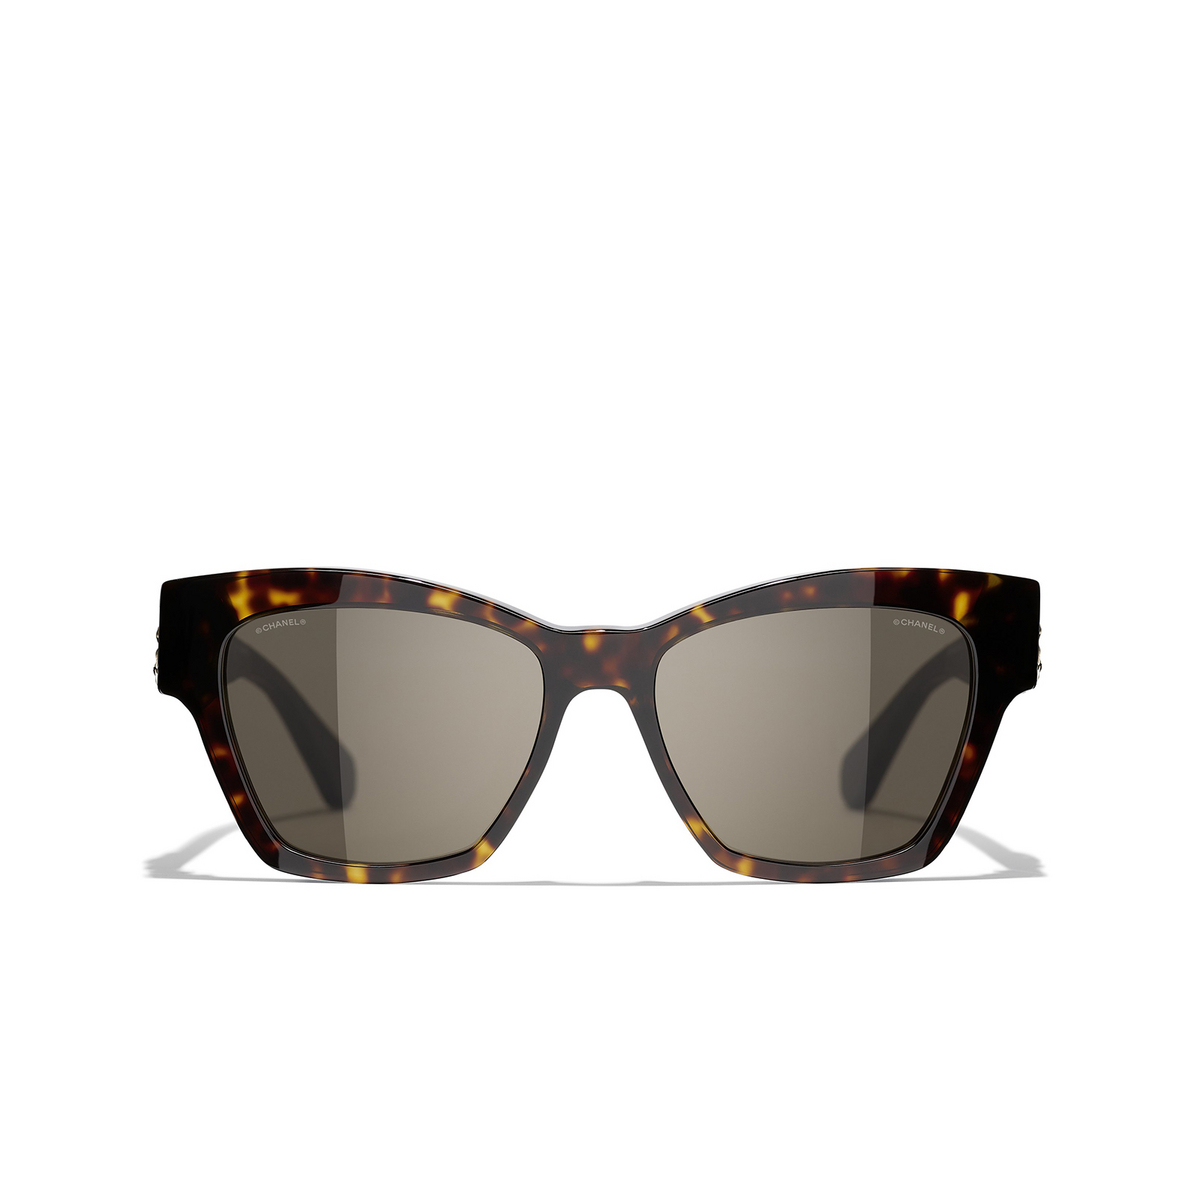 CHANEL butterfly Sunglasses C714/3 Dark Tortoise - front view